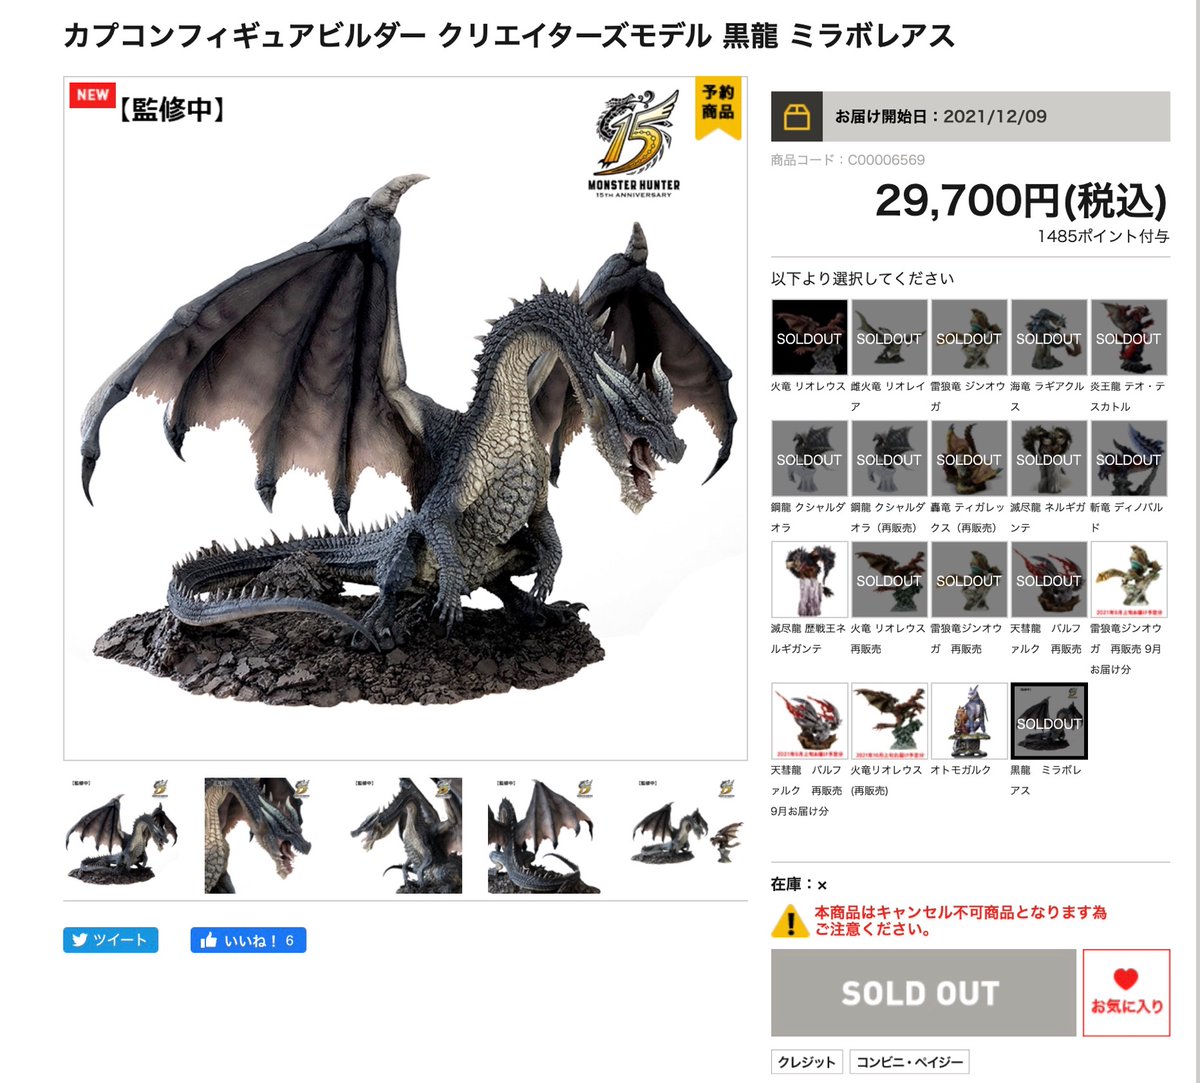 The Fatalis is already sold out. OMG I am so happy I am an impulse buyer and managed to get it #NoHesitation #JumpFirstThinkSecond #IamStartingToBelieve #MansGottaHaveHisBlackDragon ^o^